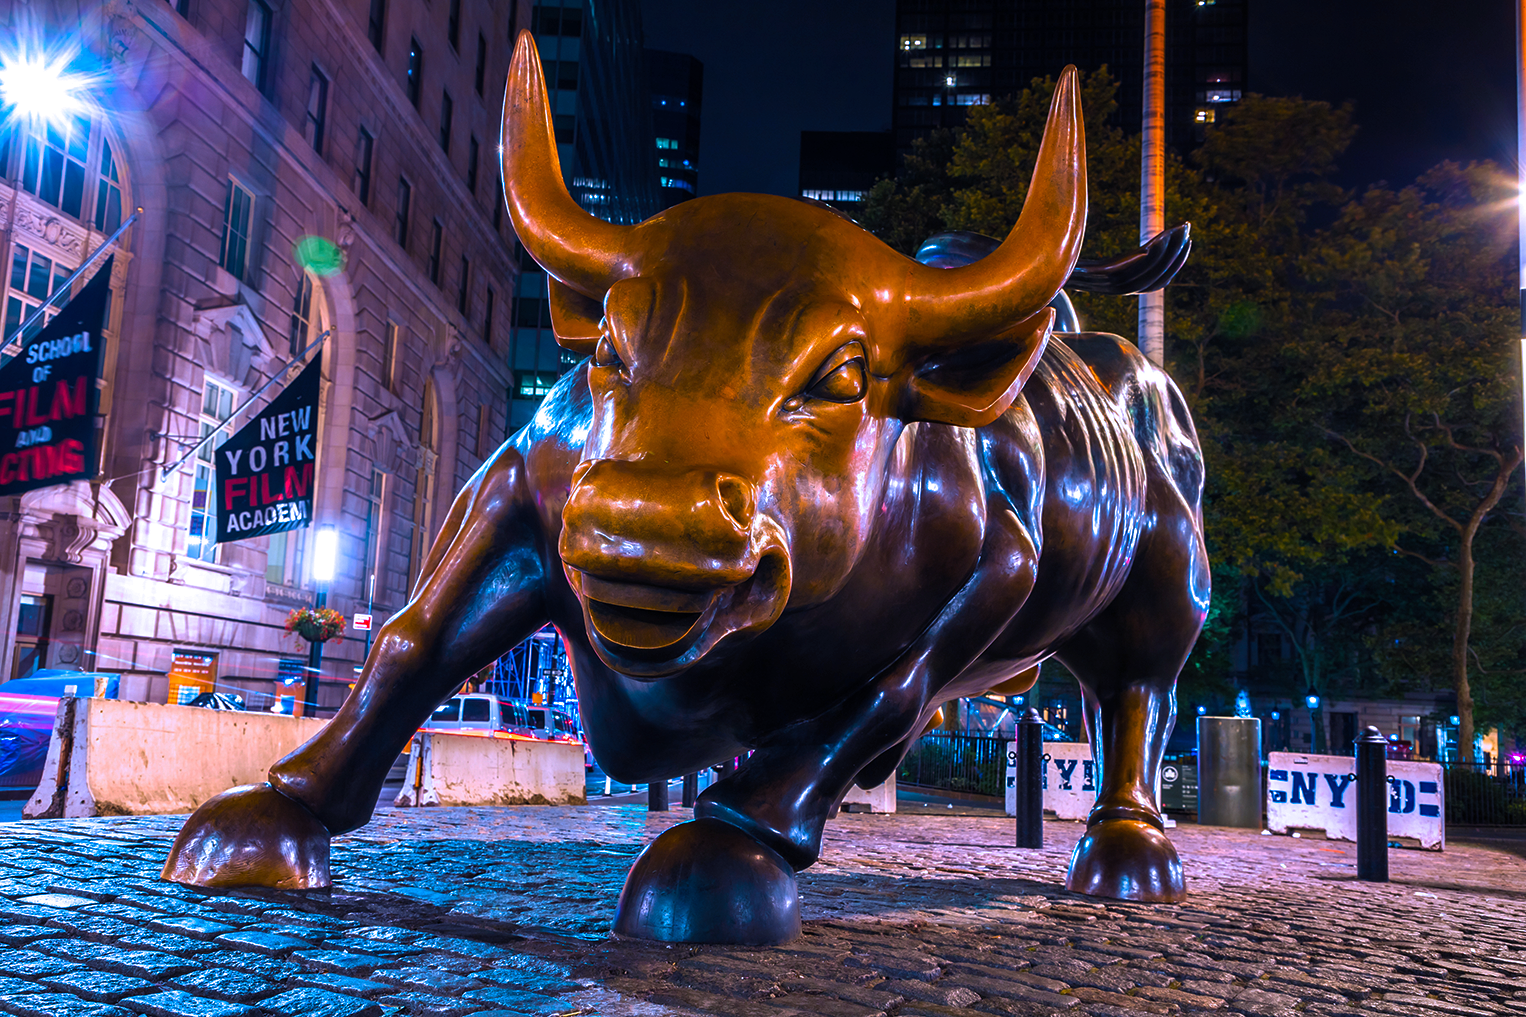 The market bull on Wall Street in NYC